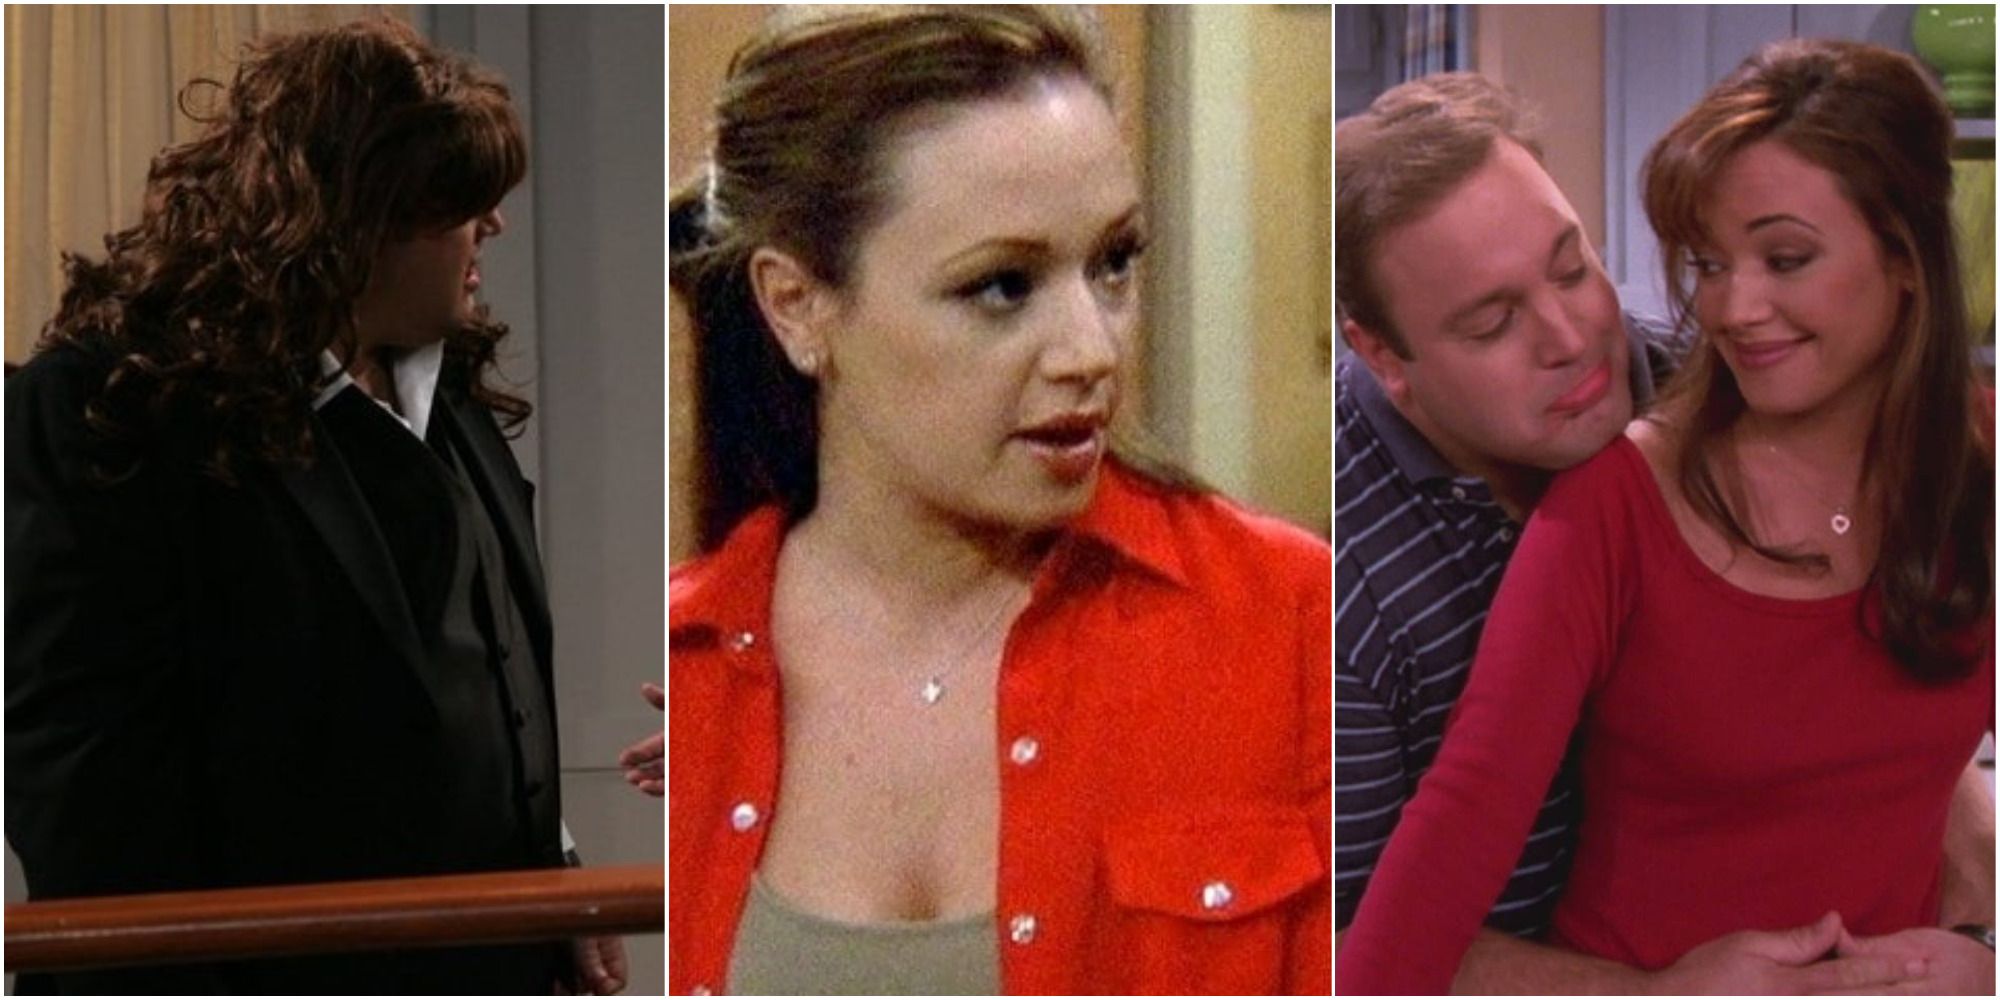 Carrie Gets Drunk  The King of Queens 